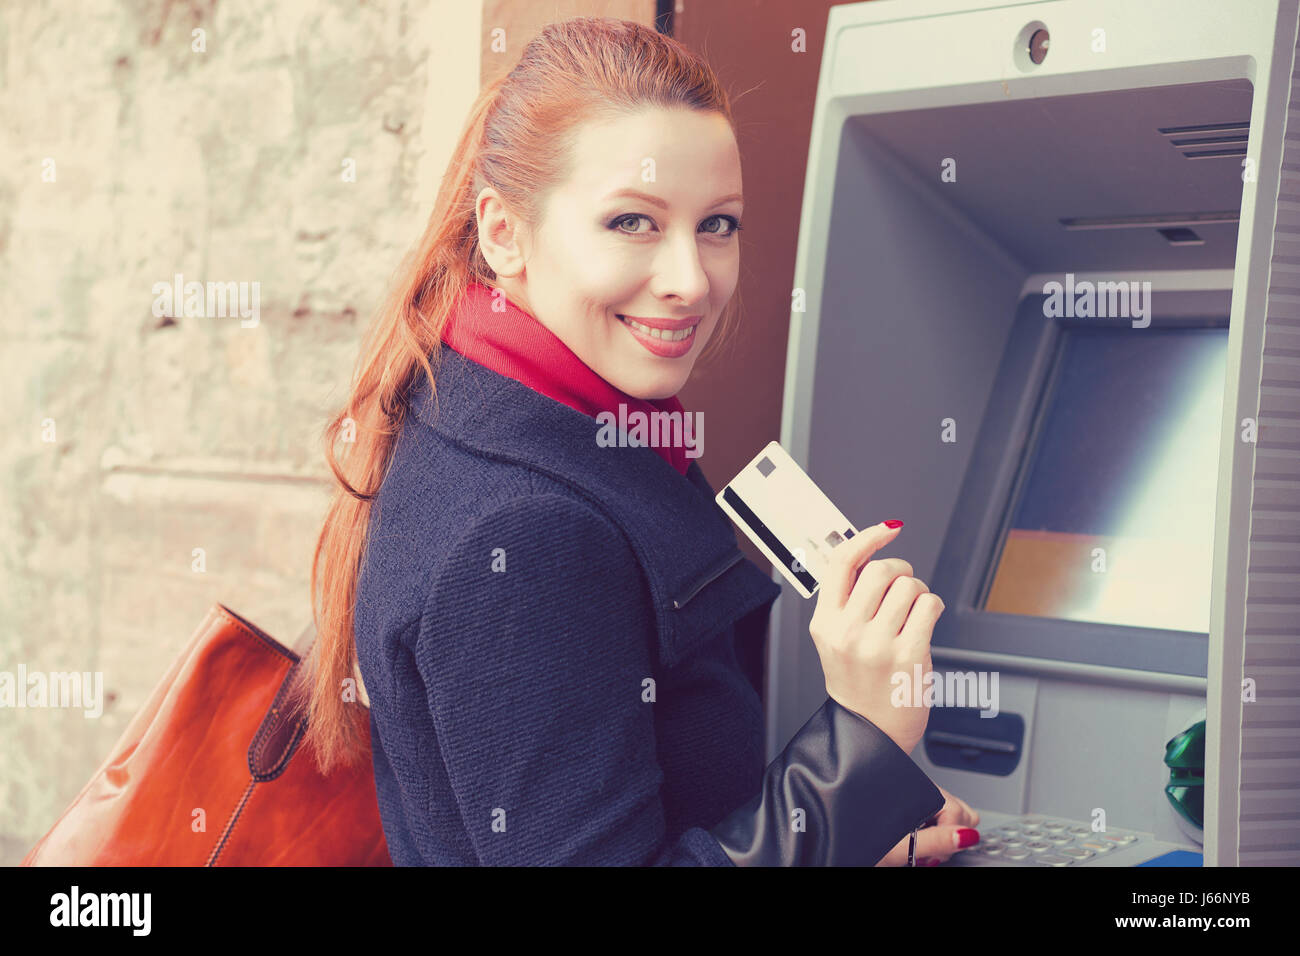 Young happy woman with bank card using ATM Stock Photo